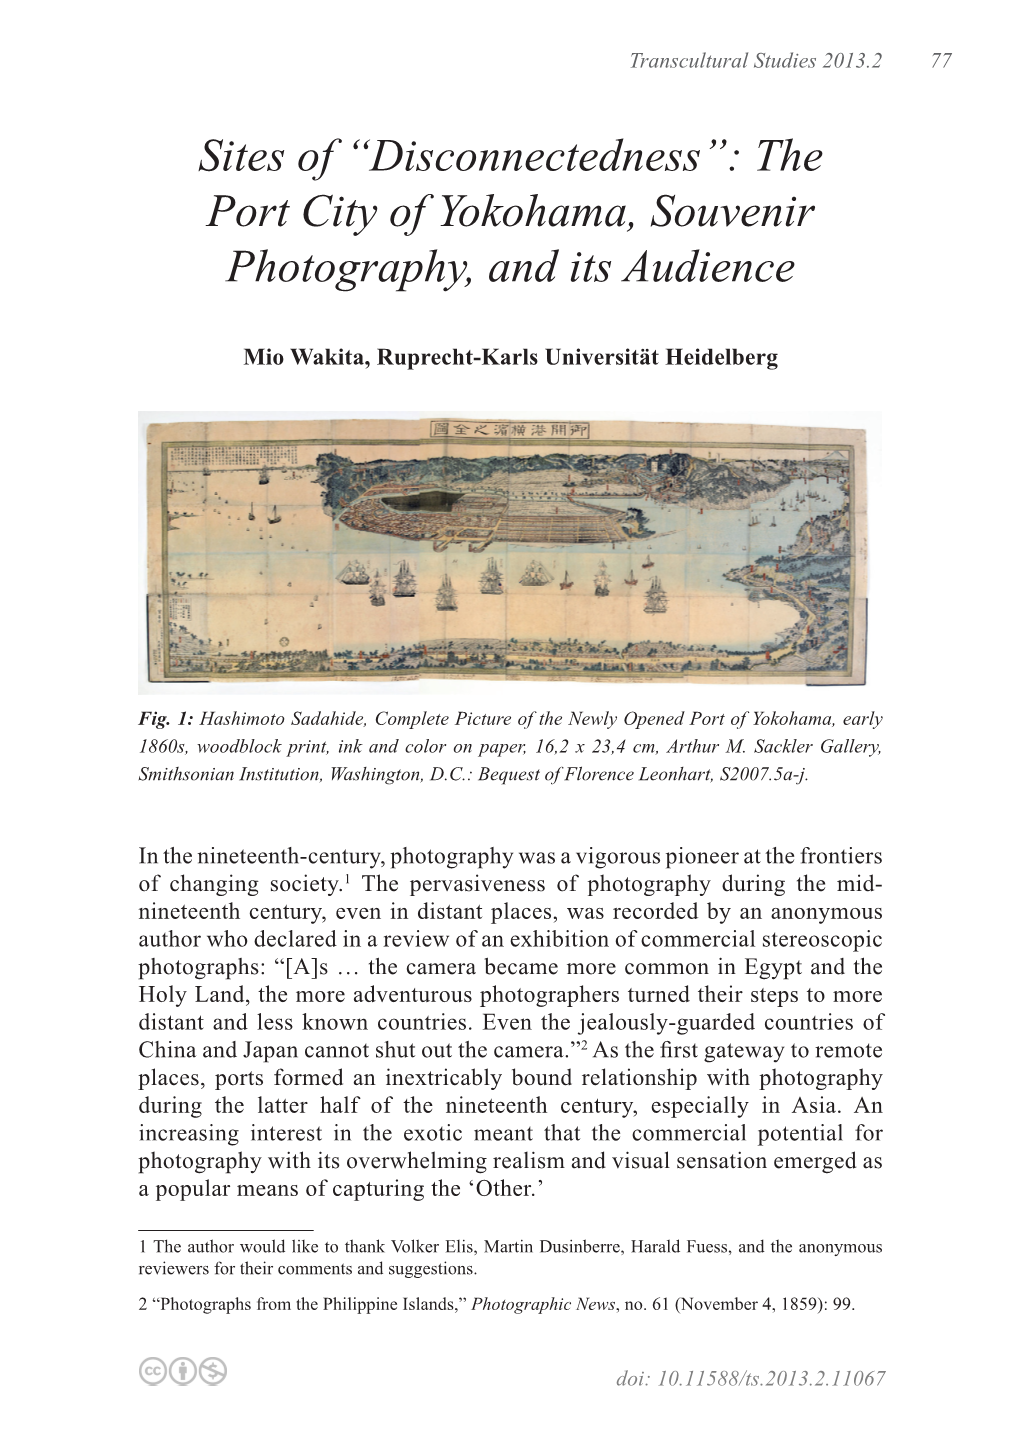 The Port City of Yokohama, Souvenir Photography, and Its Audience